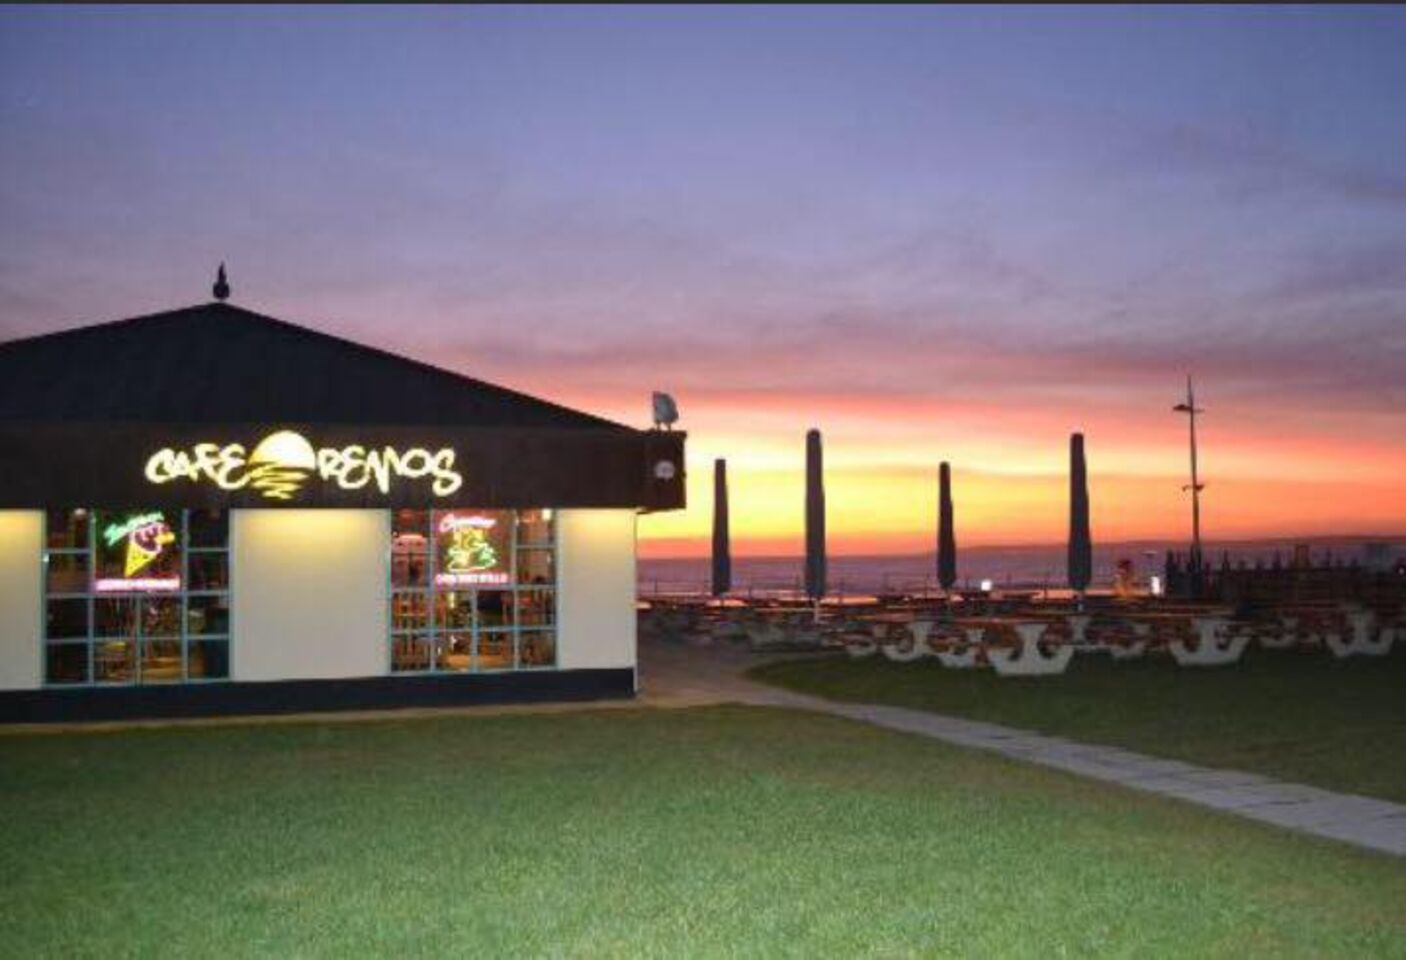 A photo of Cafe Remos